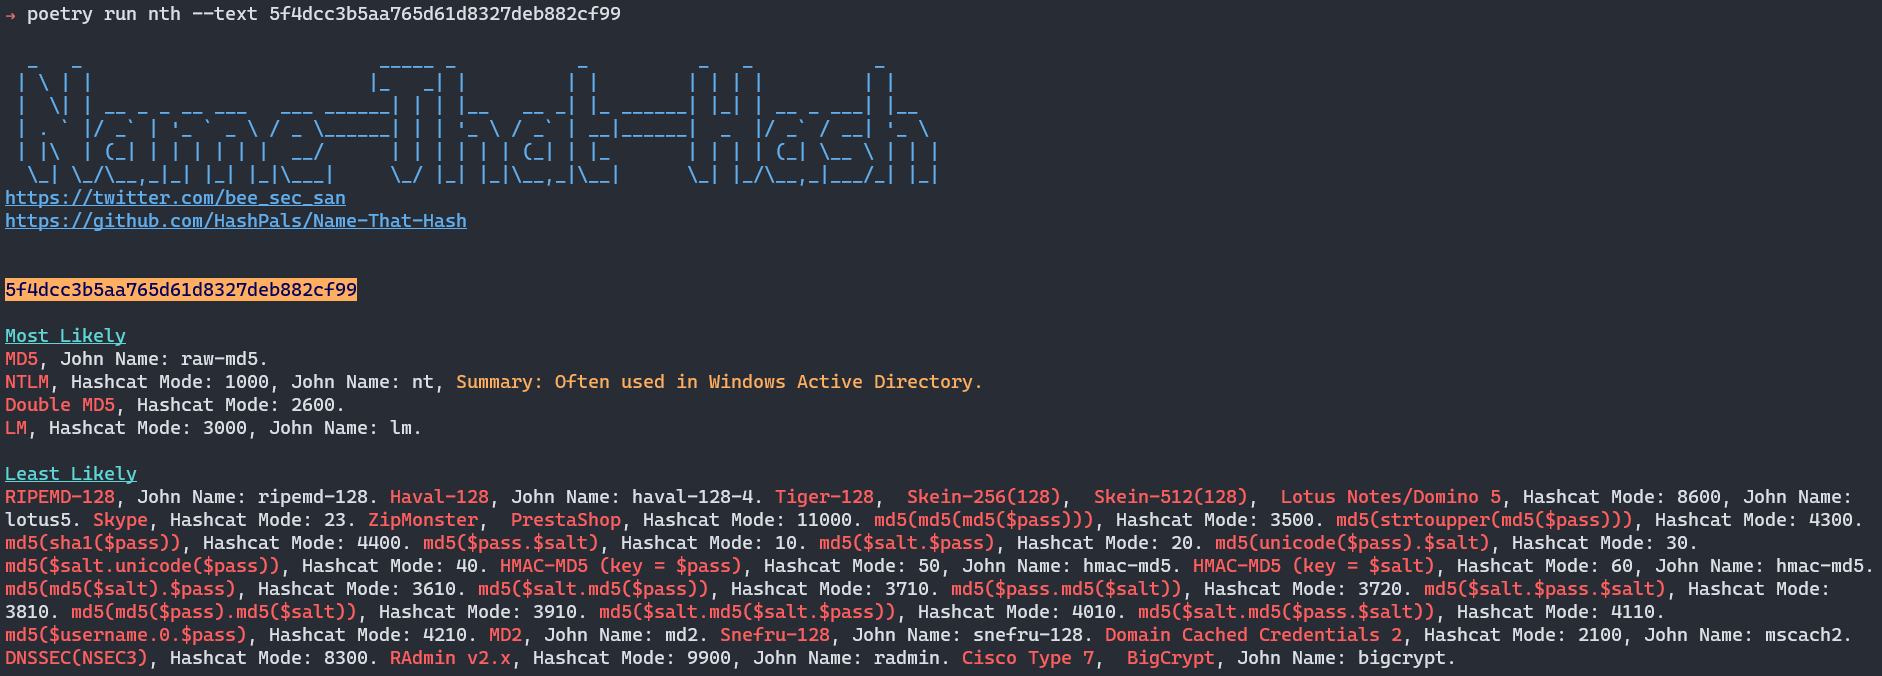 Name-that-hash proudly displays the most likely hash types